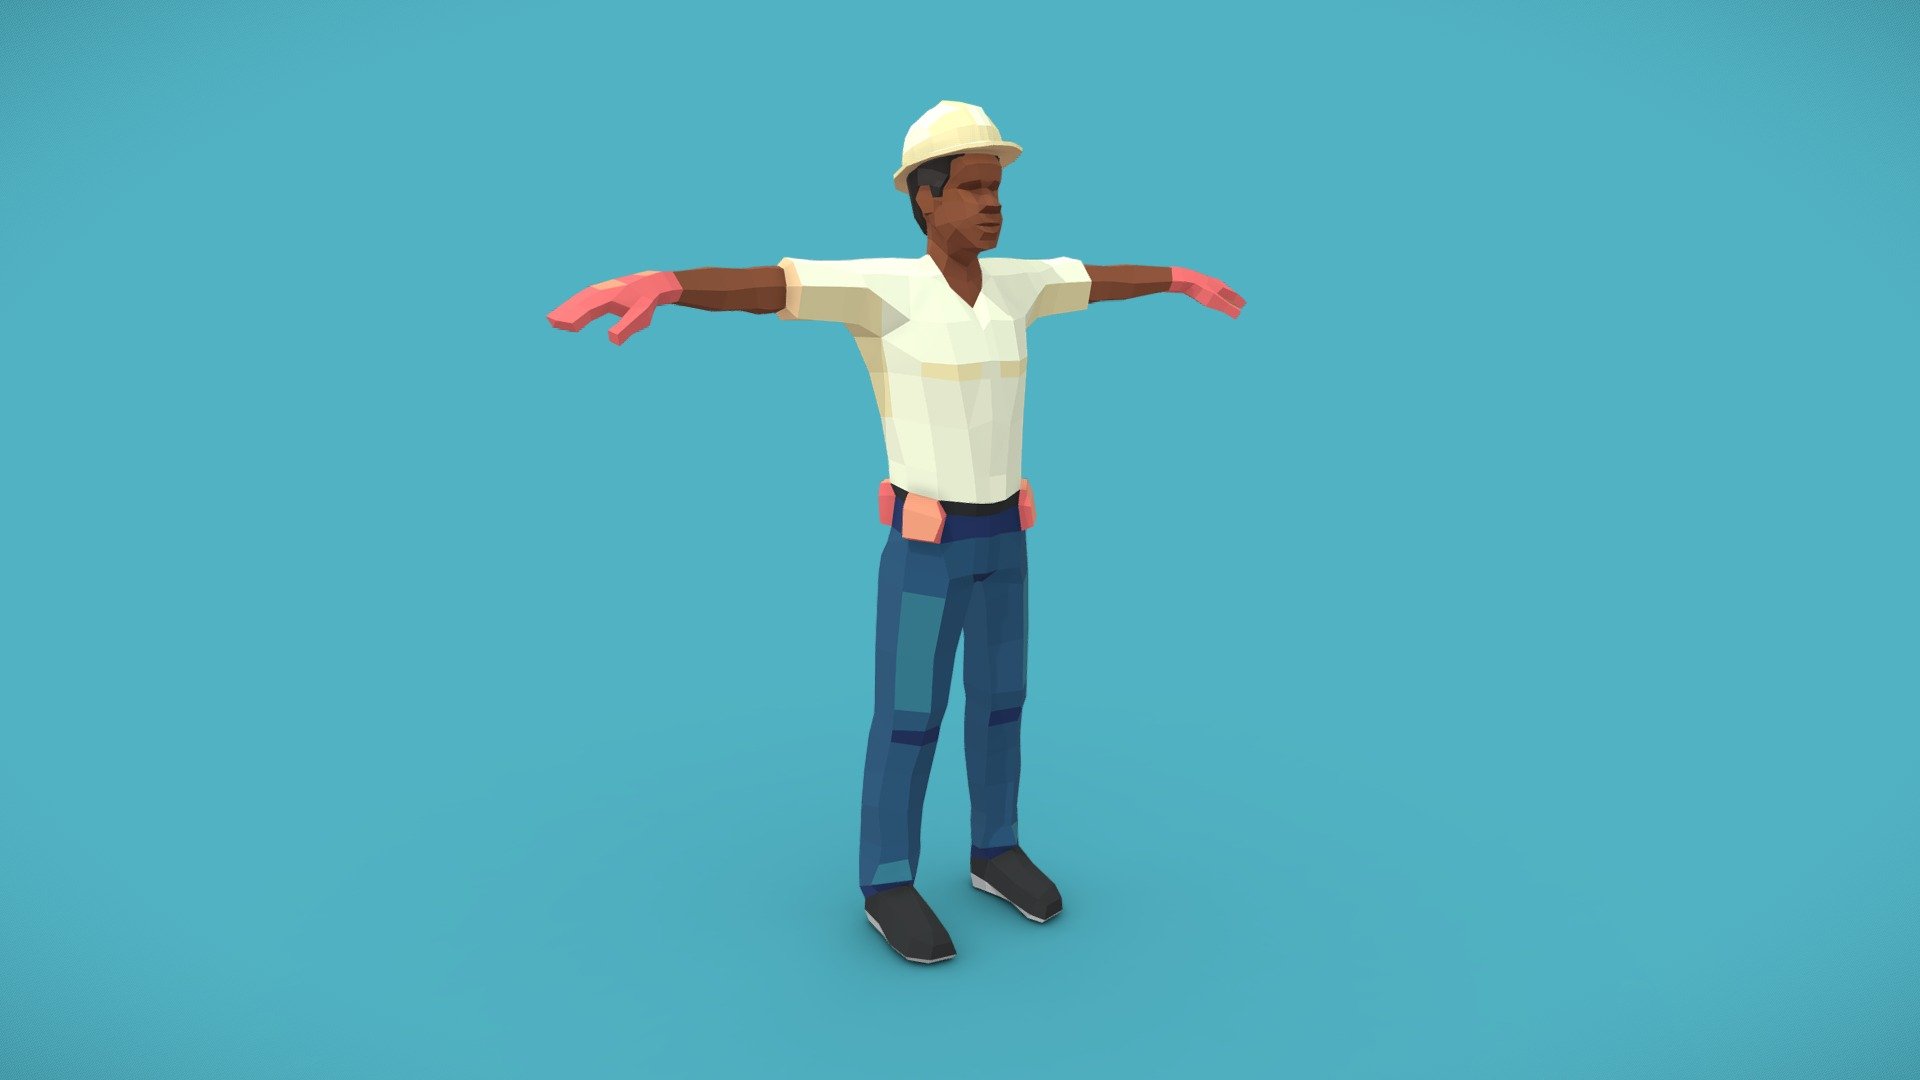 Low Poly Style character representing a worker from construction sites or related. Created with 3ds Max, rigged tested with Unity for compatibility with Humanoid System. 

Optimized for mobile with about 950 polygons (or 1800 triangles), UV mapped using a color texture palette.

You can also find these character as part of People-Mega-Pack or Professional People 3d model